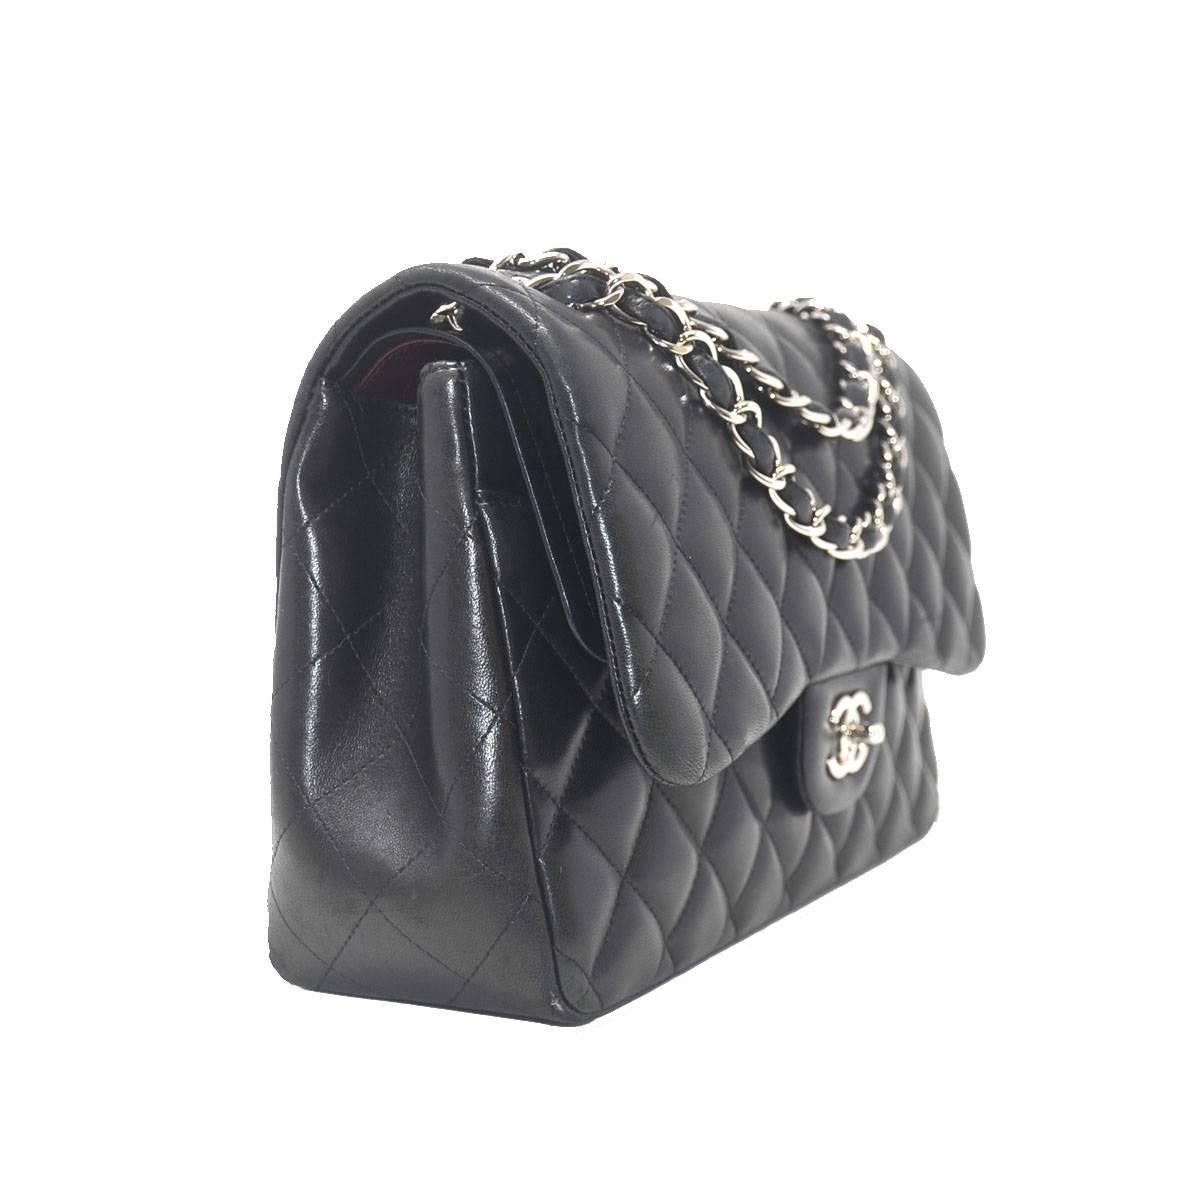 Company-Chanel
Model-Double Flap with Silver Hardware
Color-Black
Date Code-16855048
Material-Lambskin
Measurements-12